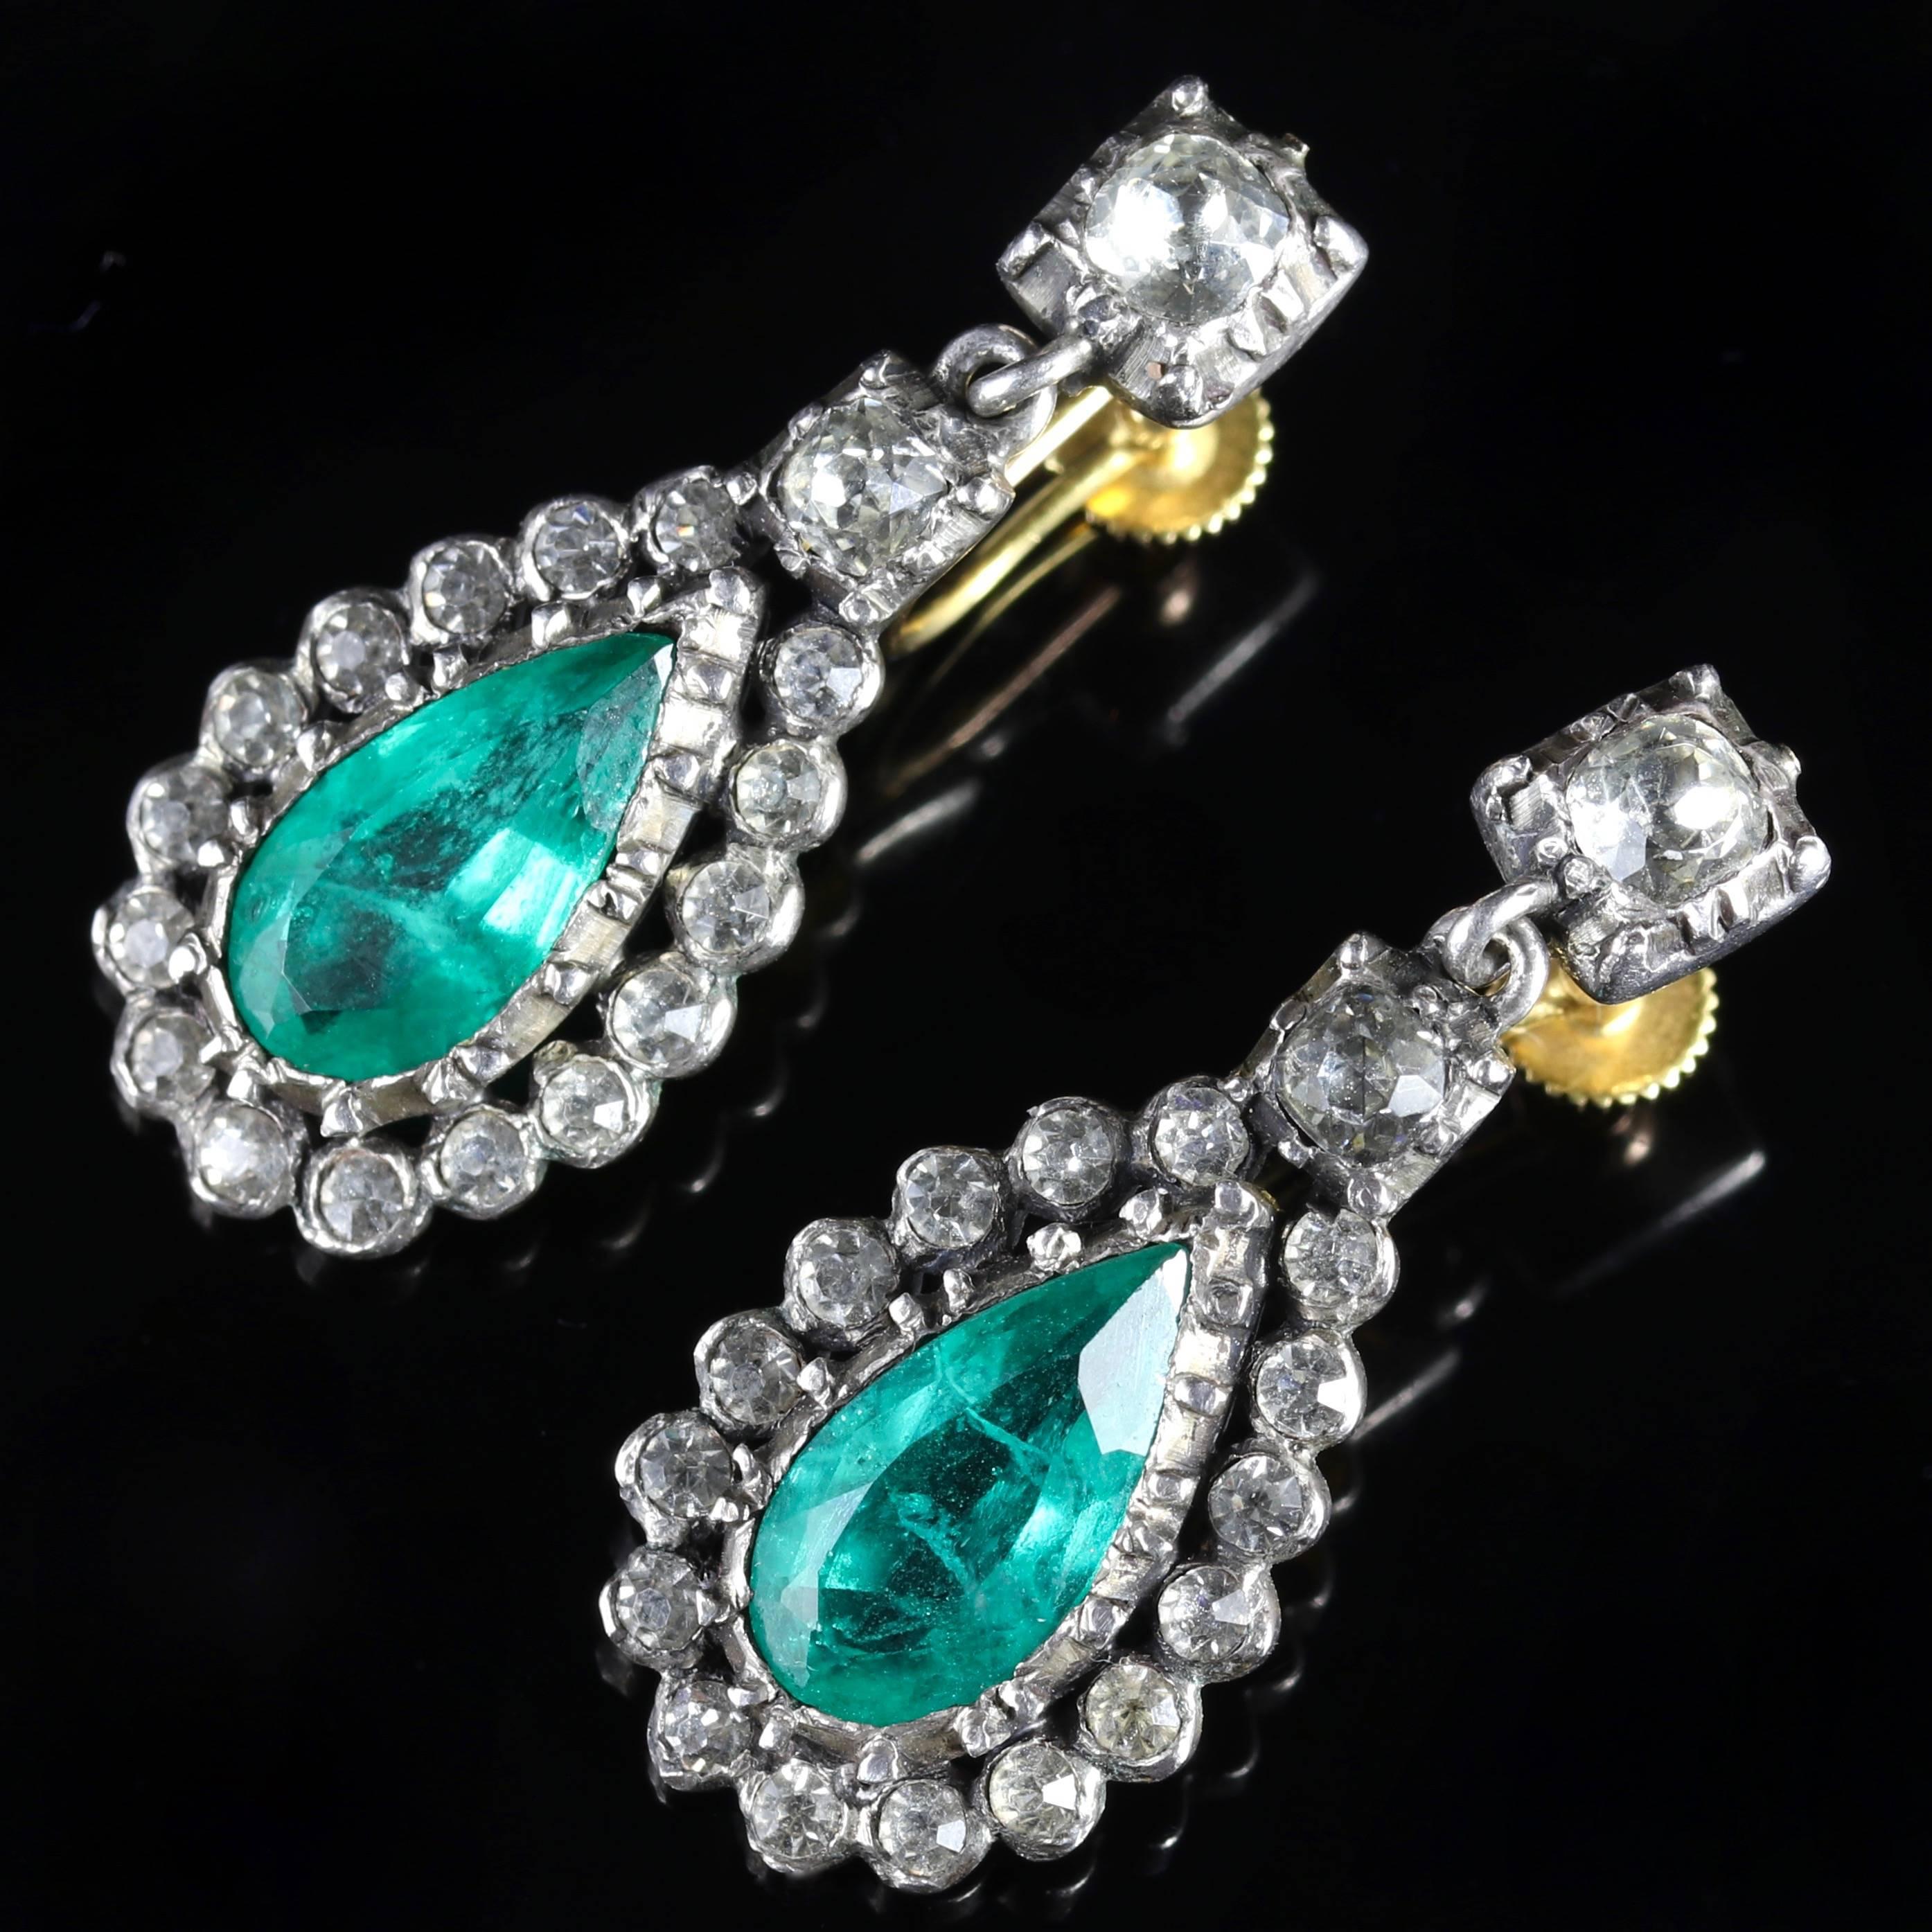 Antique Victorian Earrings Green Paste circa 1880 Screw Backs In Excellent Condition For Sale In Lancaster, Lancashire